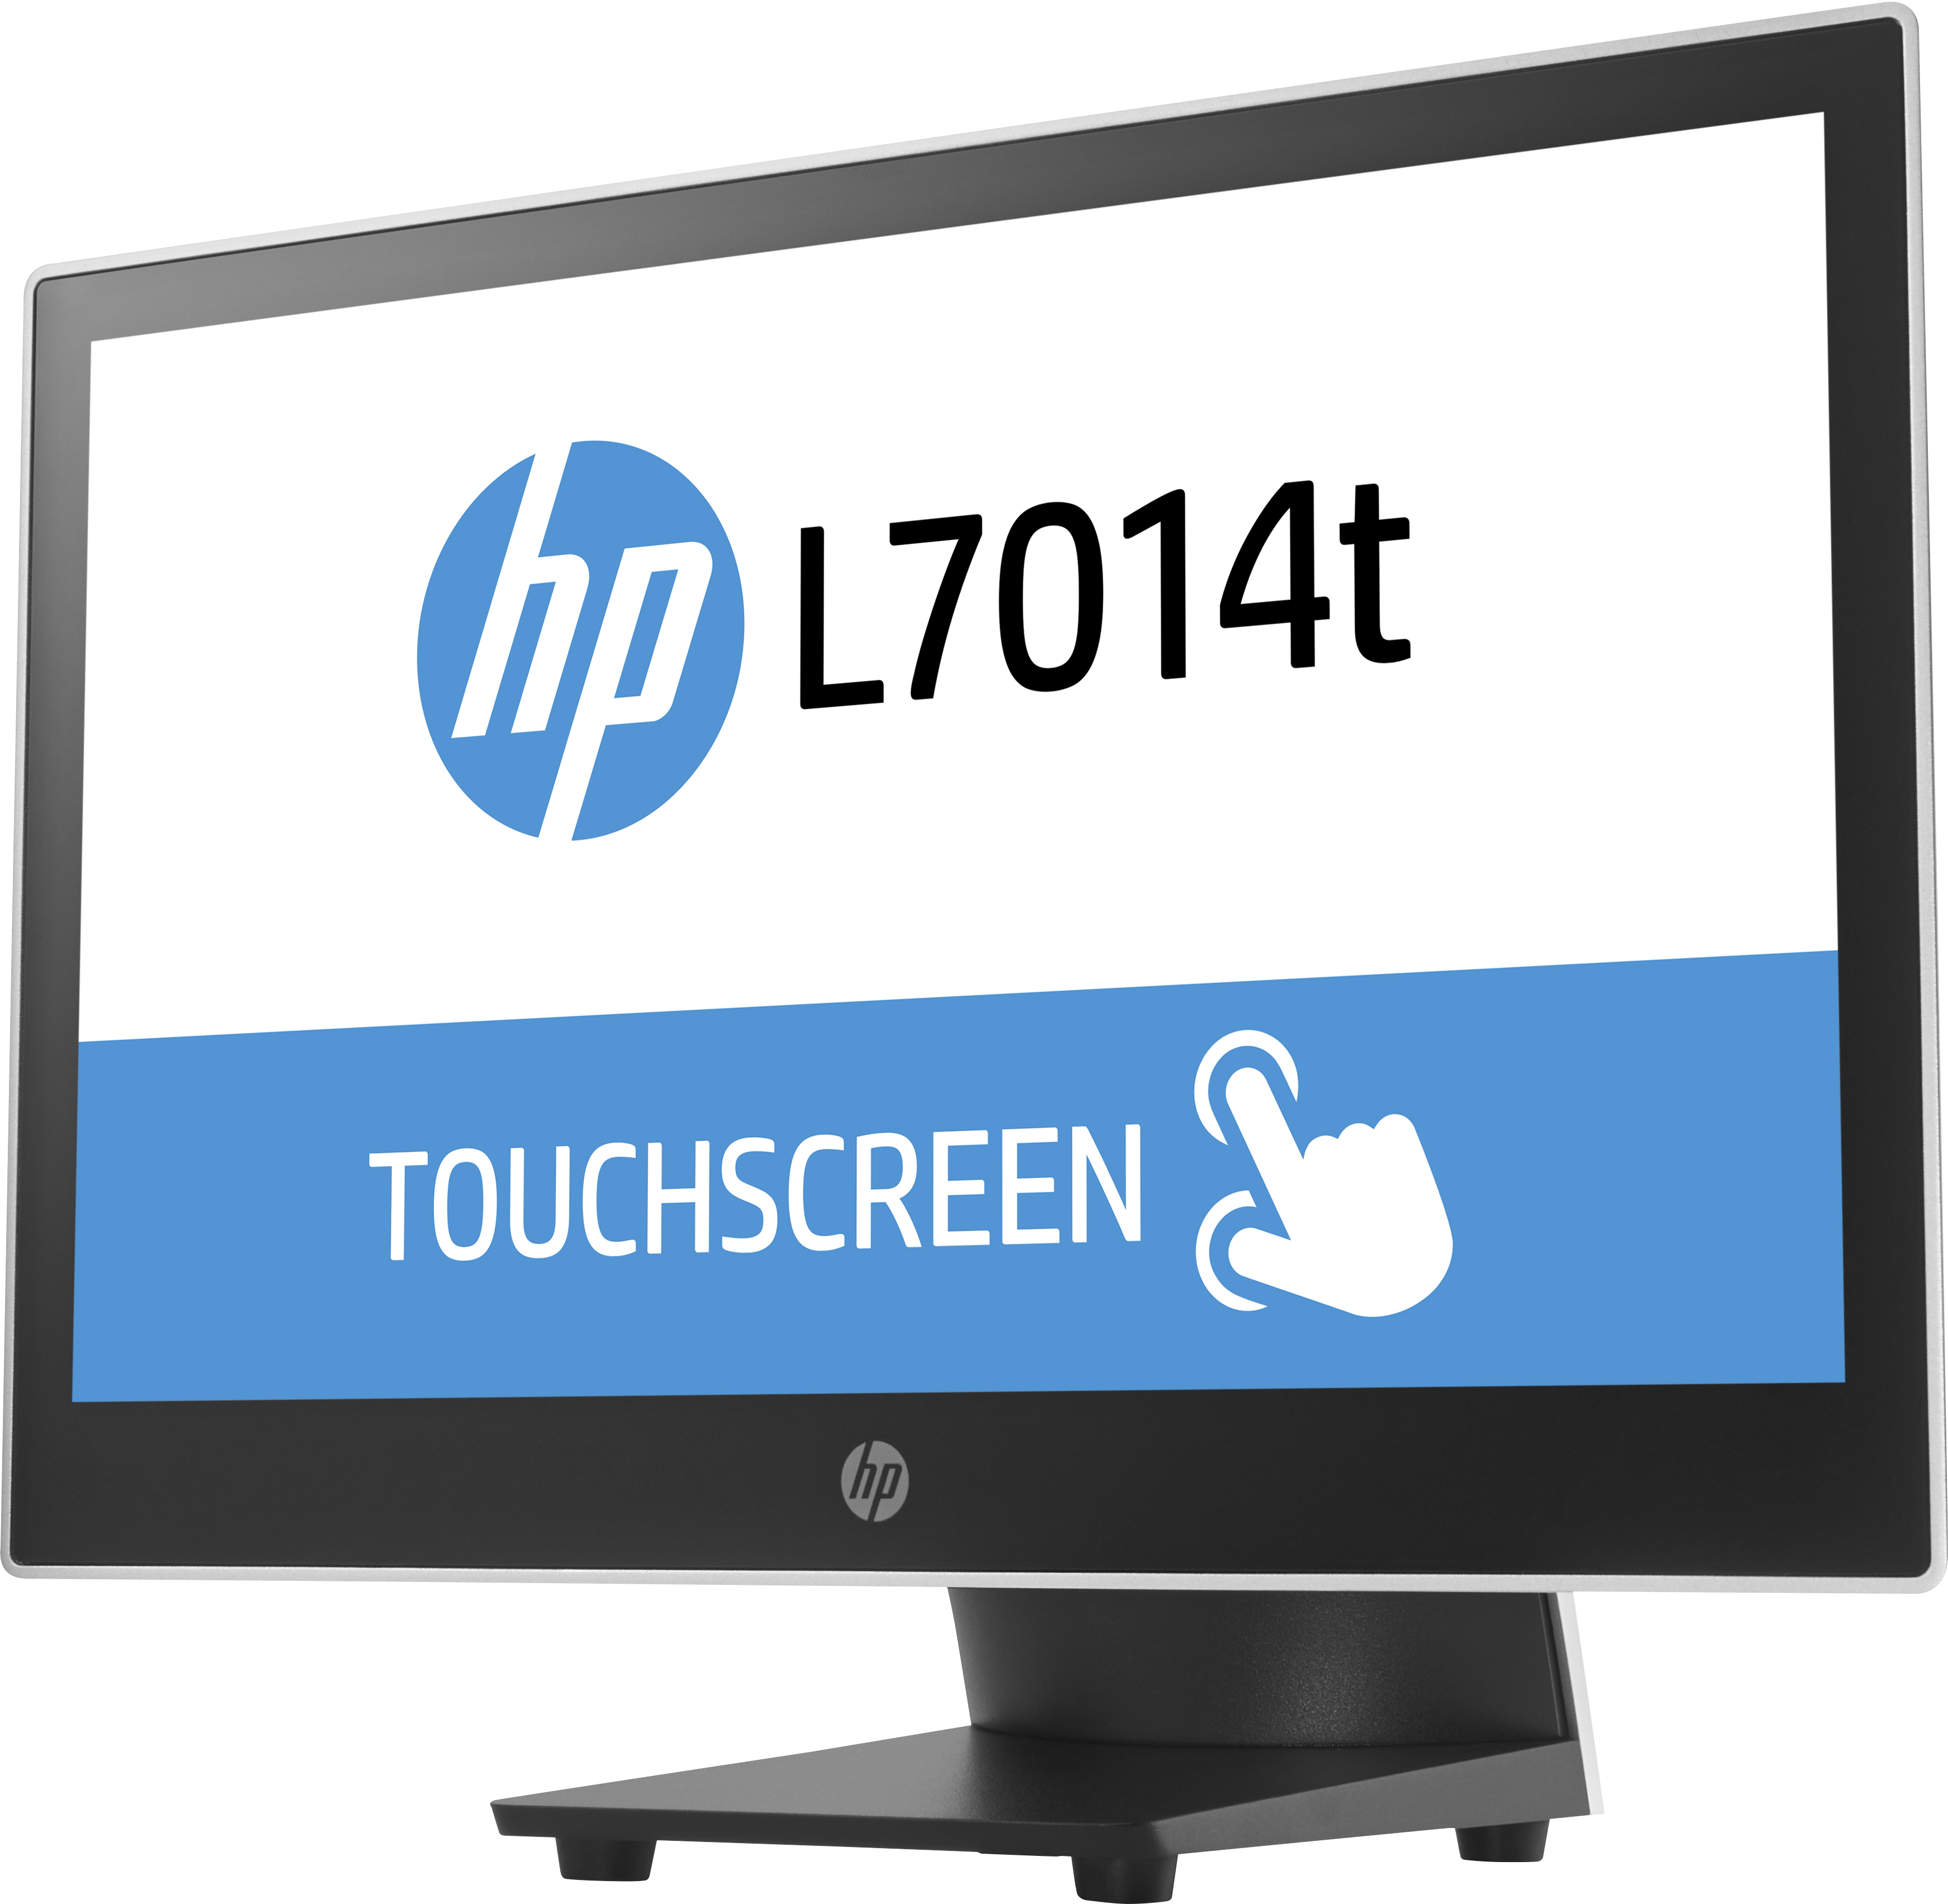 HP L7014t Retail Touch Monitor - LED-Monitor mit KVM-Switch - 35.6 cm (14")